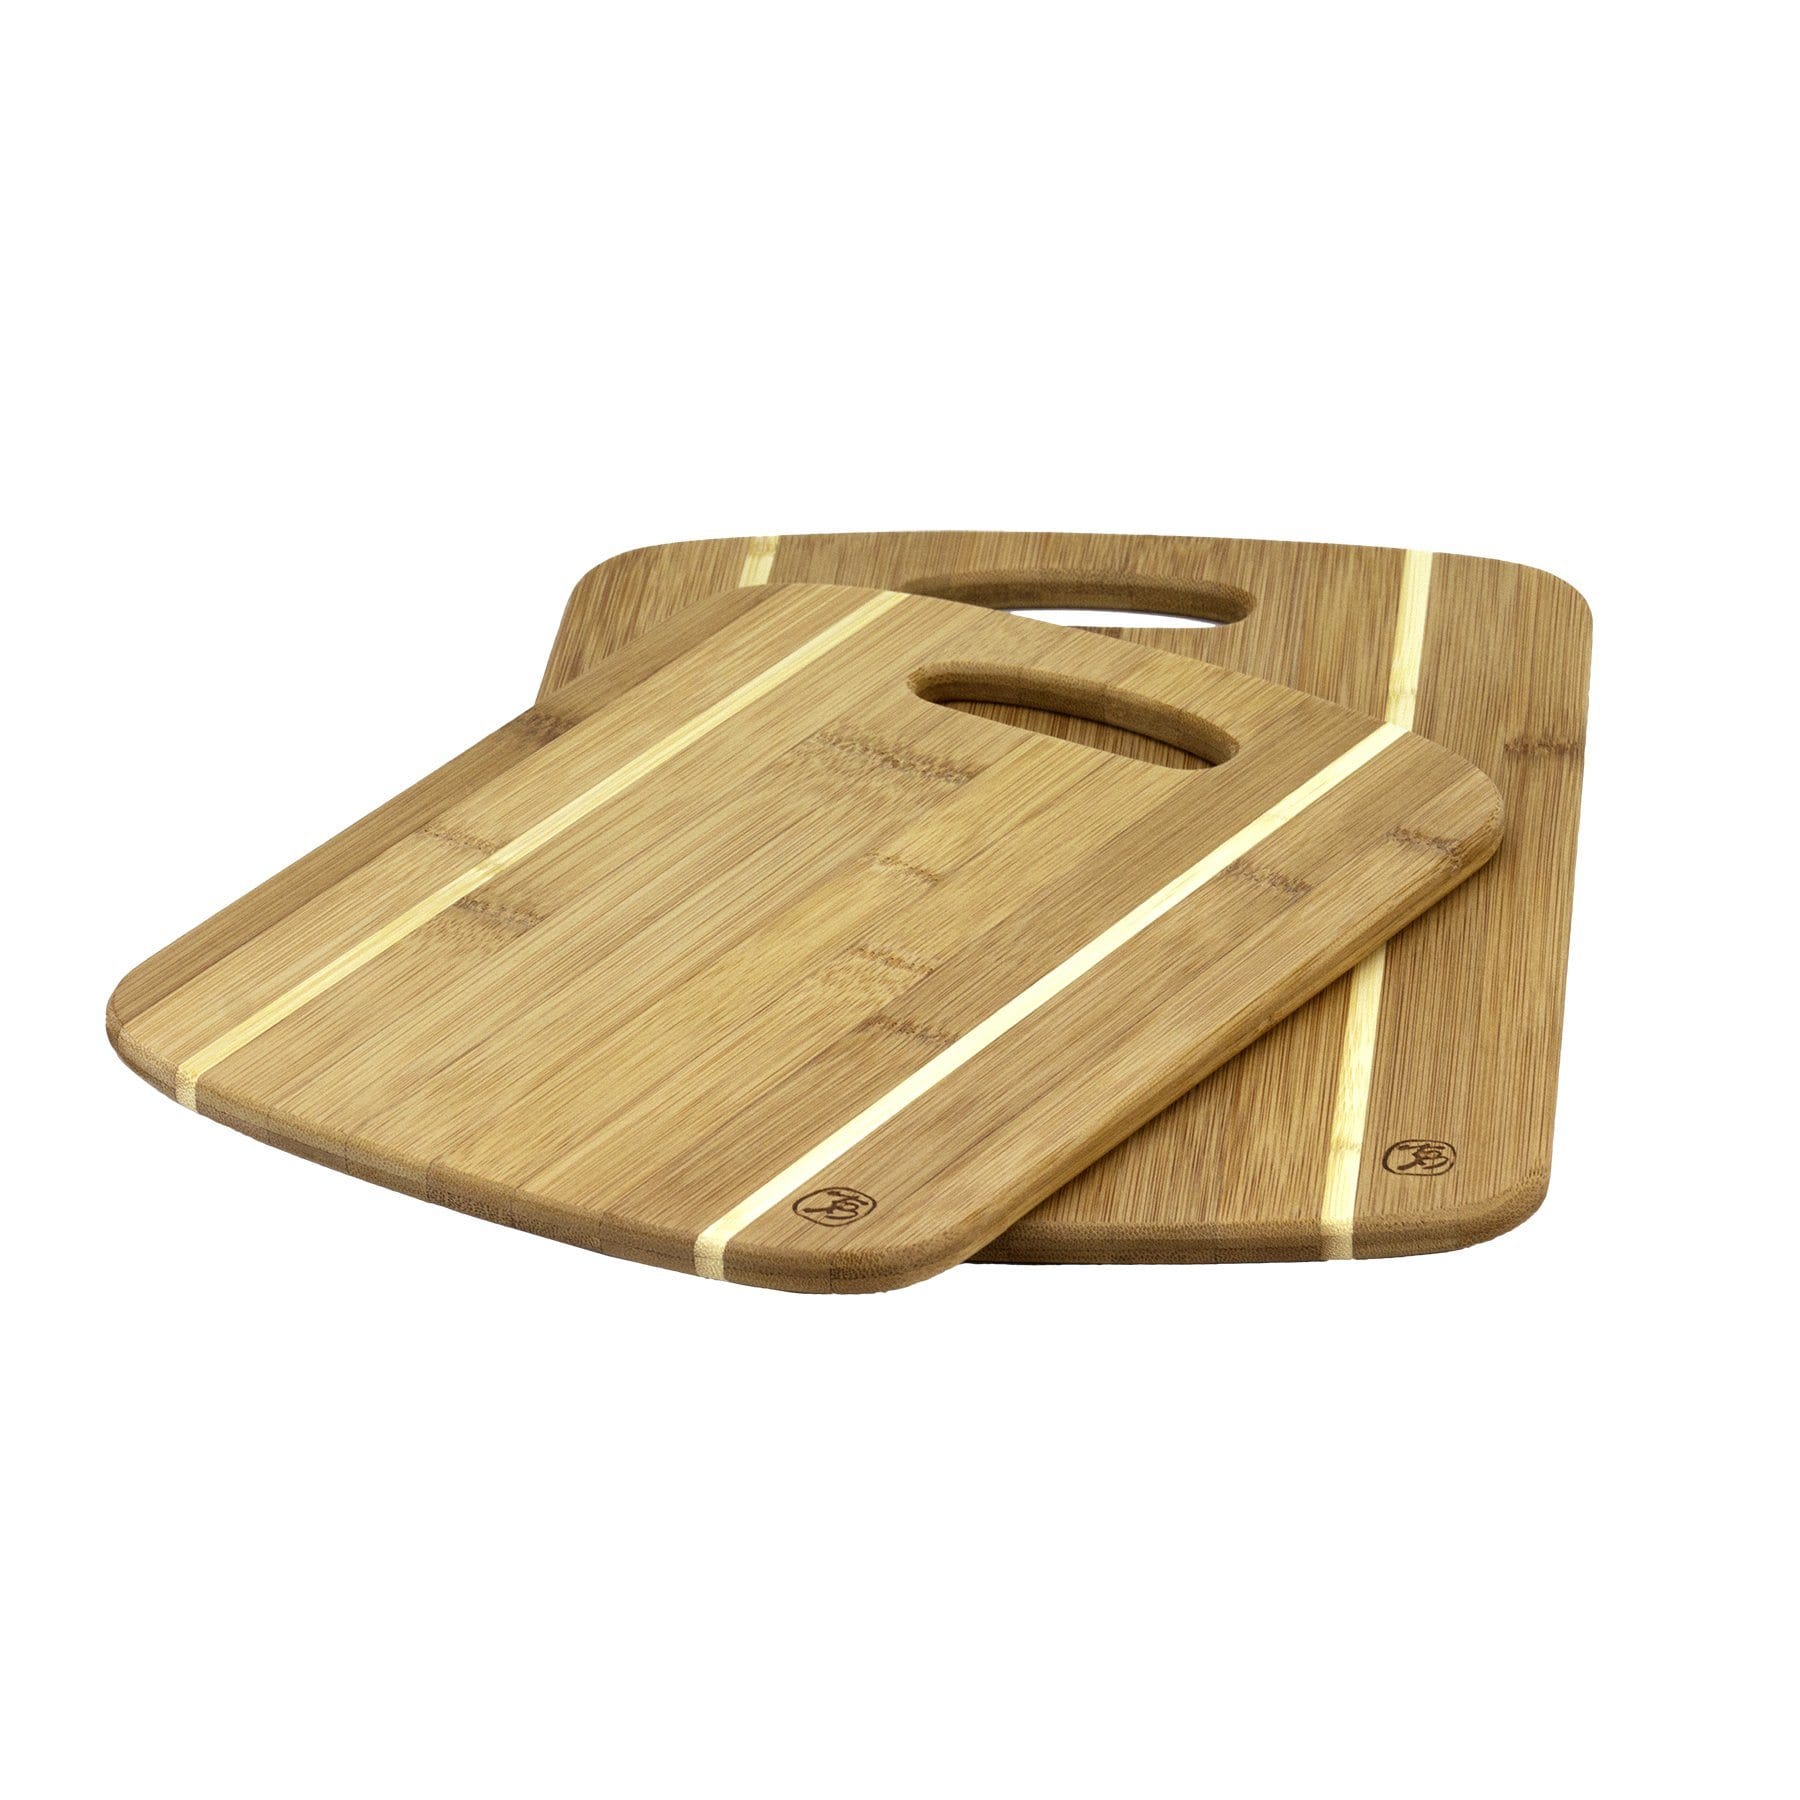 Totally Bamboo 3-Piece Bamboo Serving and Cutting Board Set, Brown